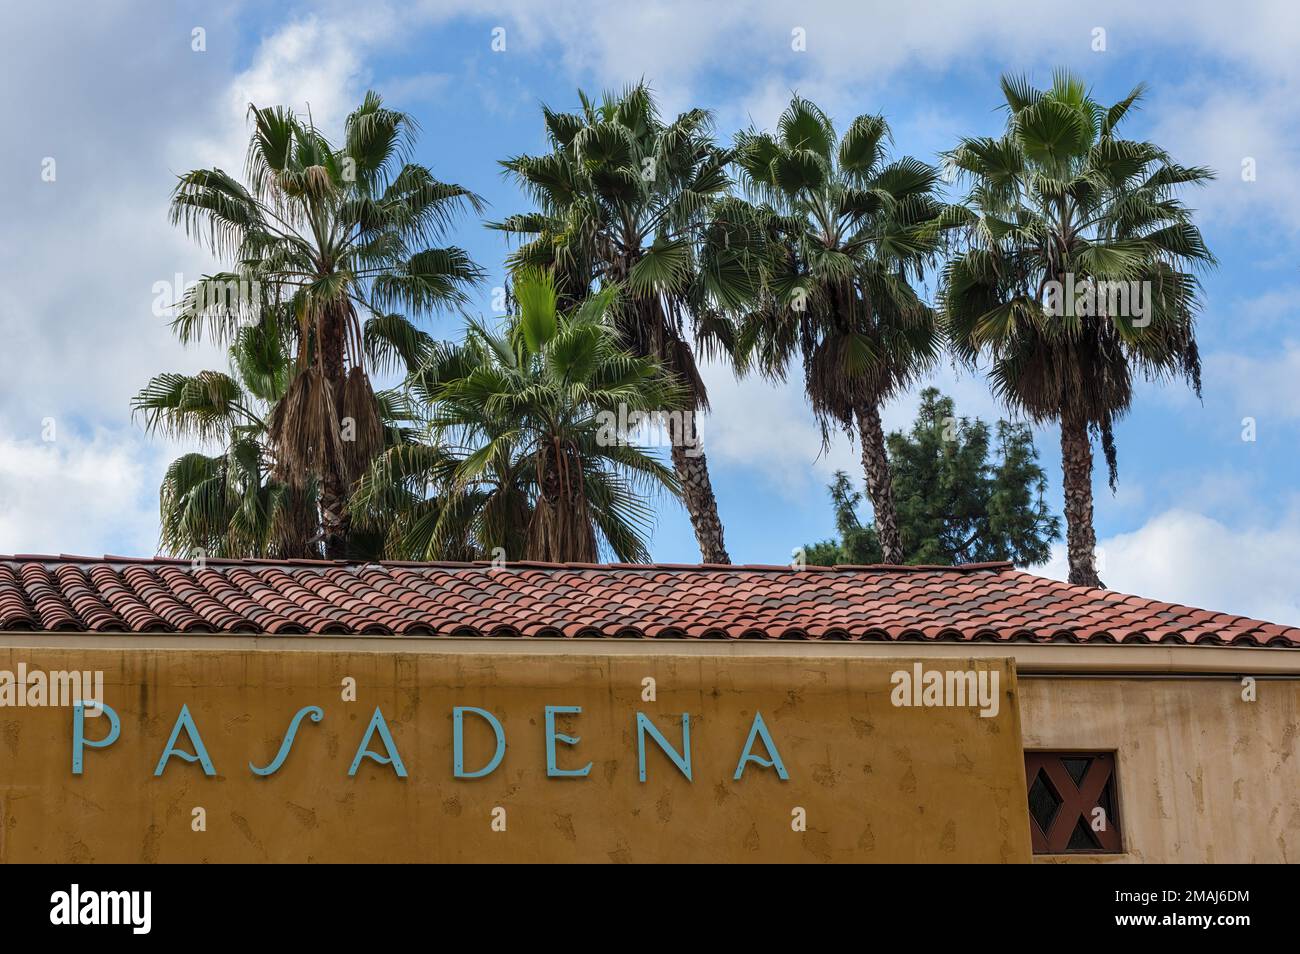 Pasadena, California, United States - January 16, 2023:  building exterior in the Del Mar Station Transit Village shown against palm trees and sky wit Stock Photo